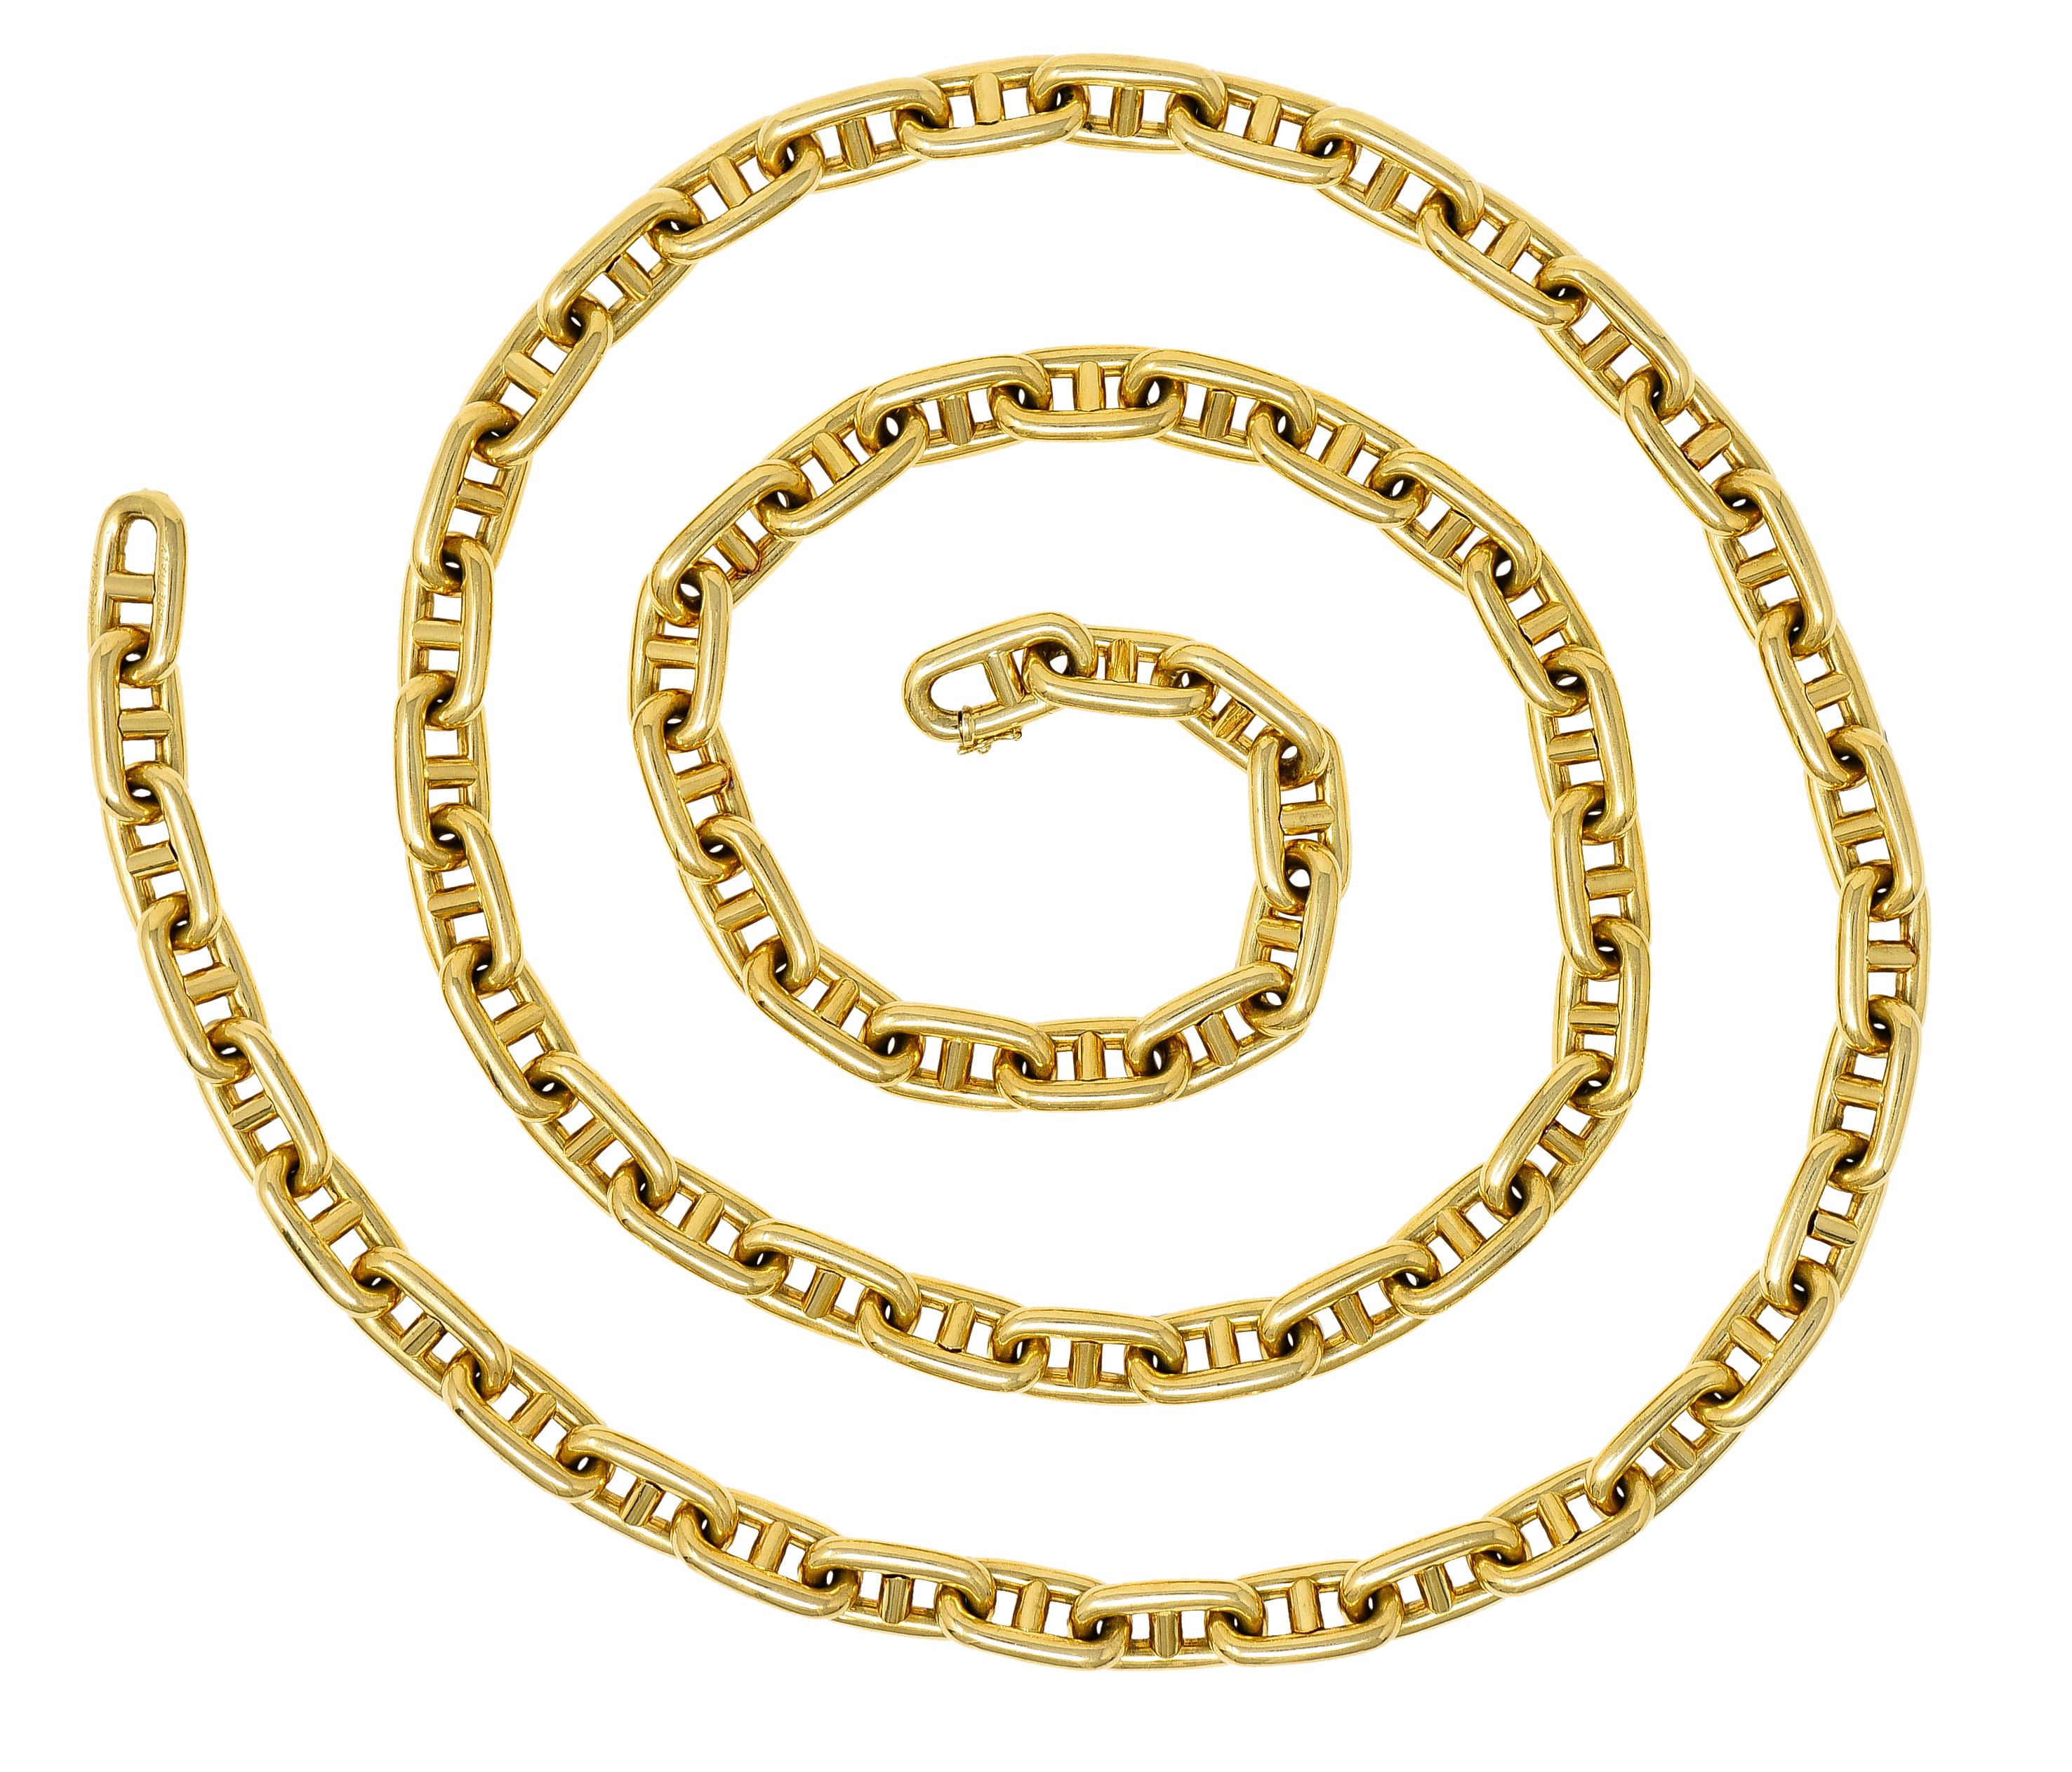 Necklace is comprised of substantial and stylized mariner links

Puffed with a brightly polished finish

Completed by a concealed clasp that opens on a hinge

With a figure eight safety

Italian assay marks for 18 karat gold and Vicenza,